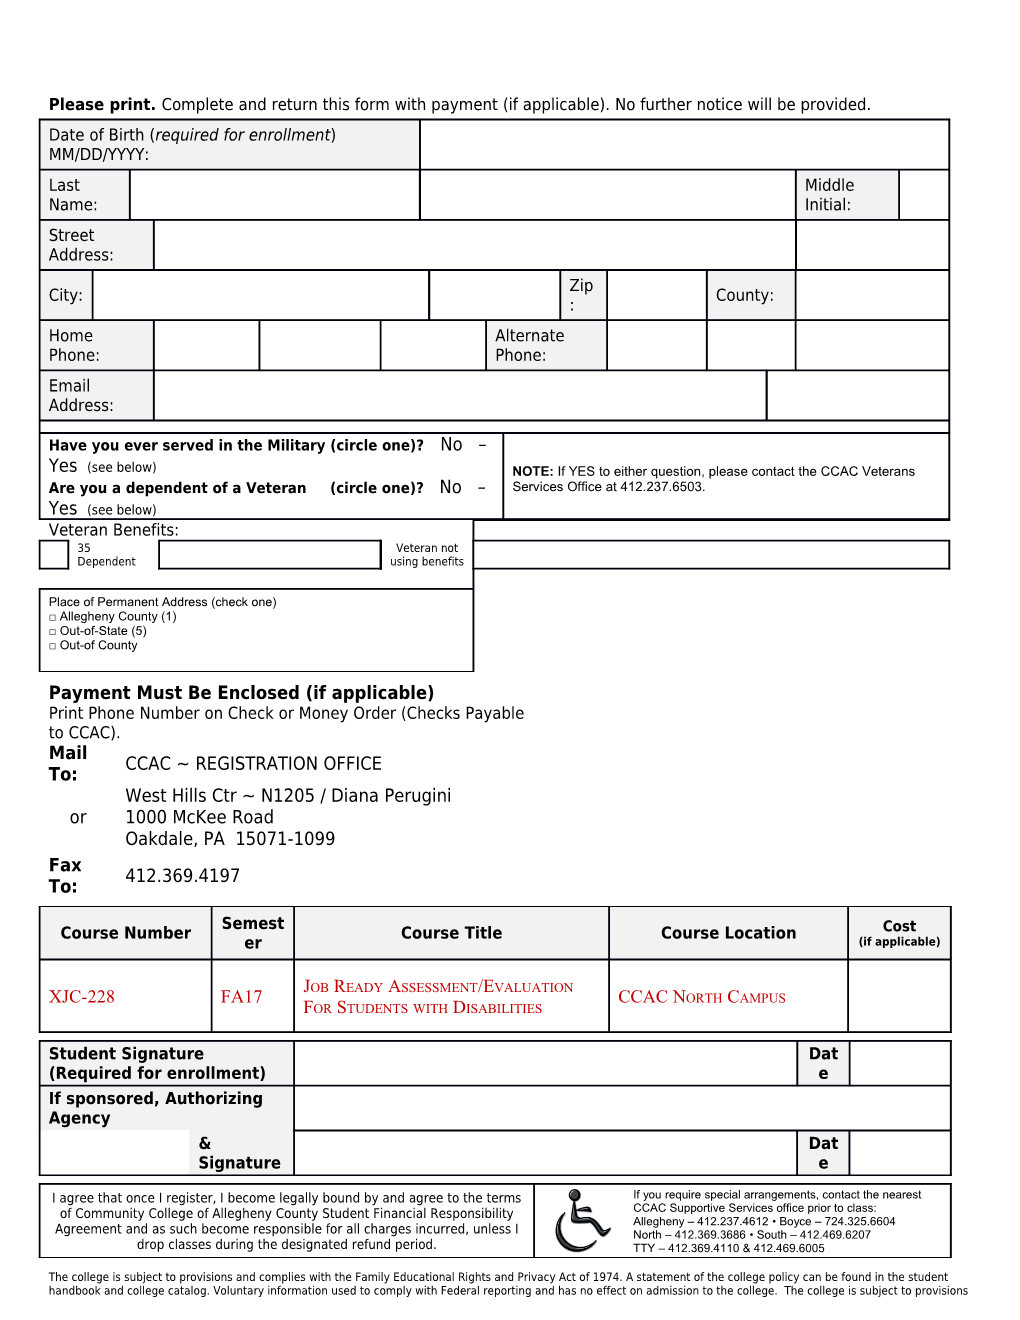 Please Print.Complete and Return This Form with Payment (If Applicable). No Further Notice